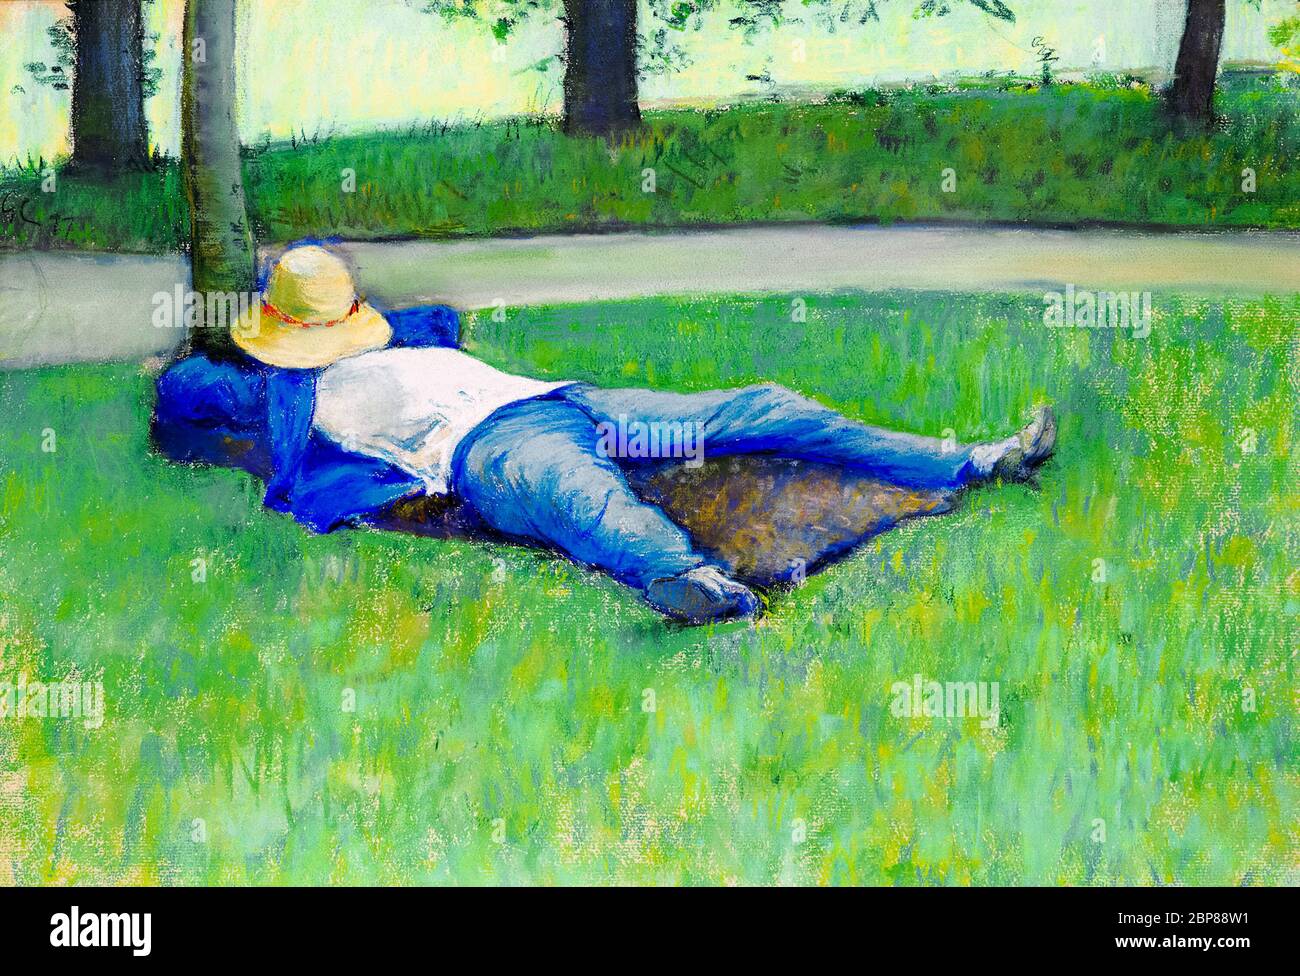 Gustave Caillebotte, il NAP (Boy Sleeping on the Grass), disegno pastello, 1877 Foto Stock